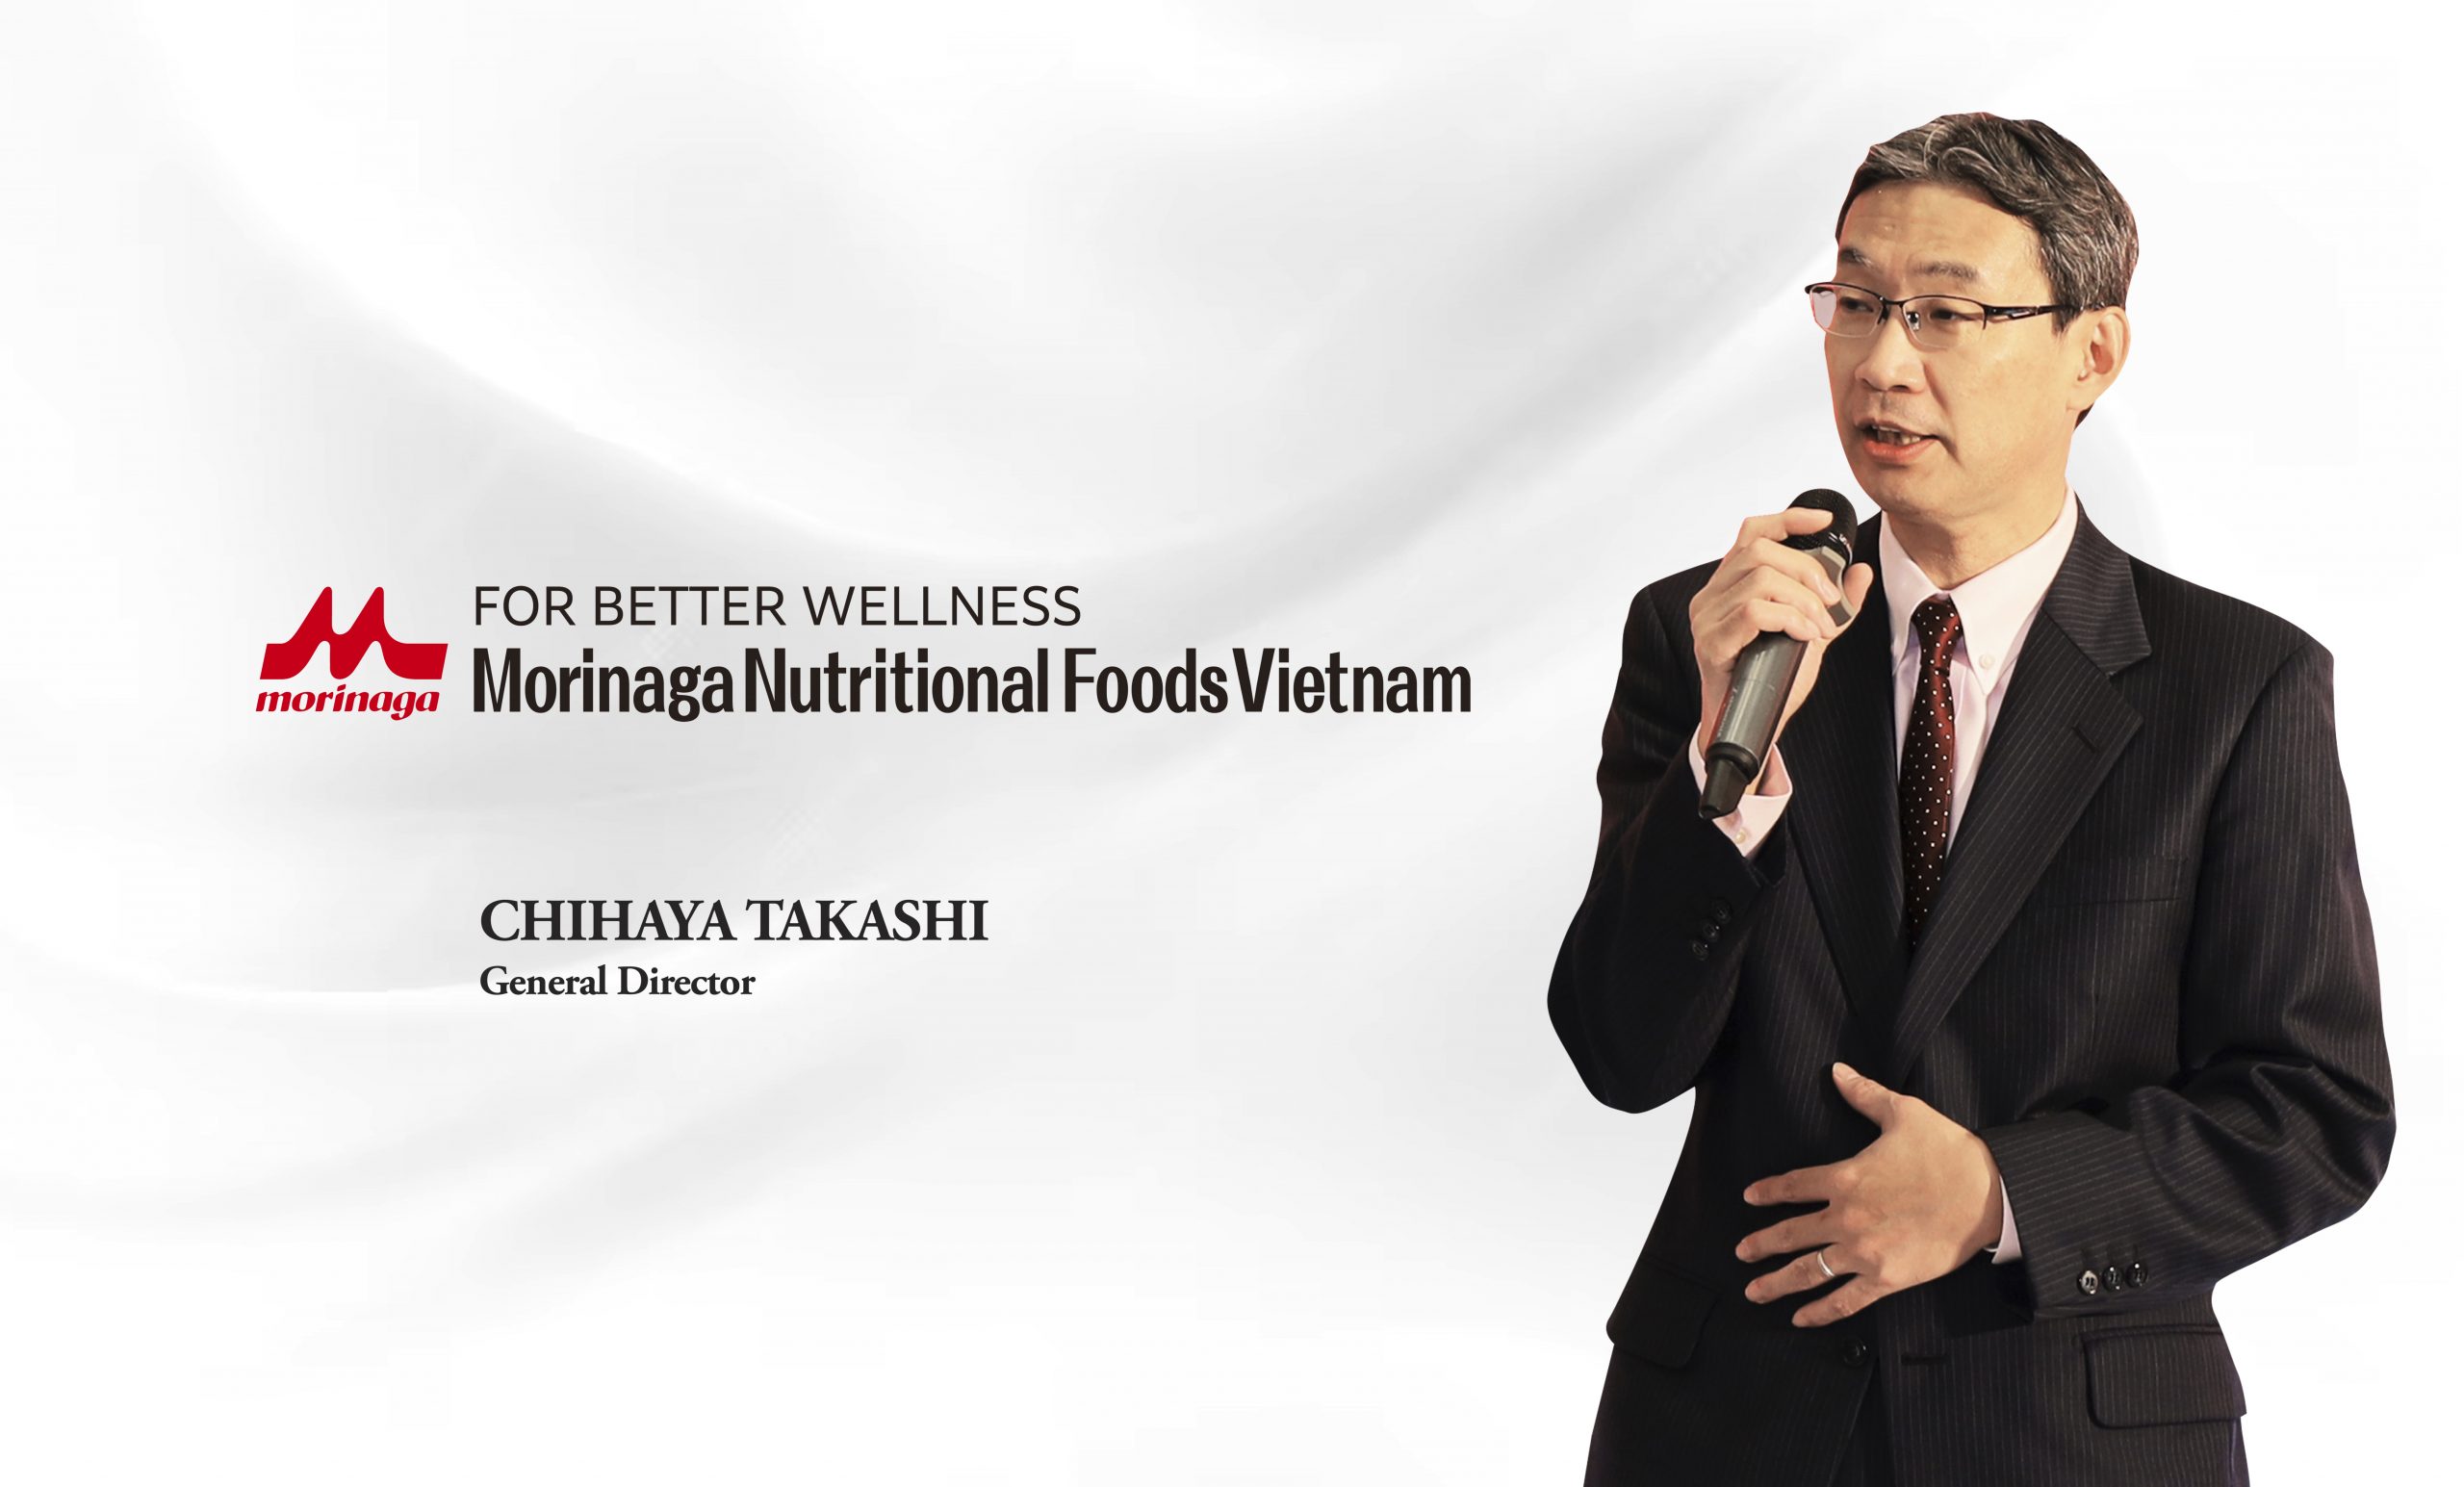 ANNOUNCEMENT FOR CHANGING COMPANY’S NAME – MORINAGA NUTRITIONAL FOODS VIETNAM